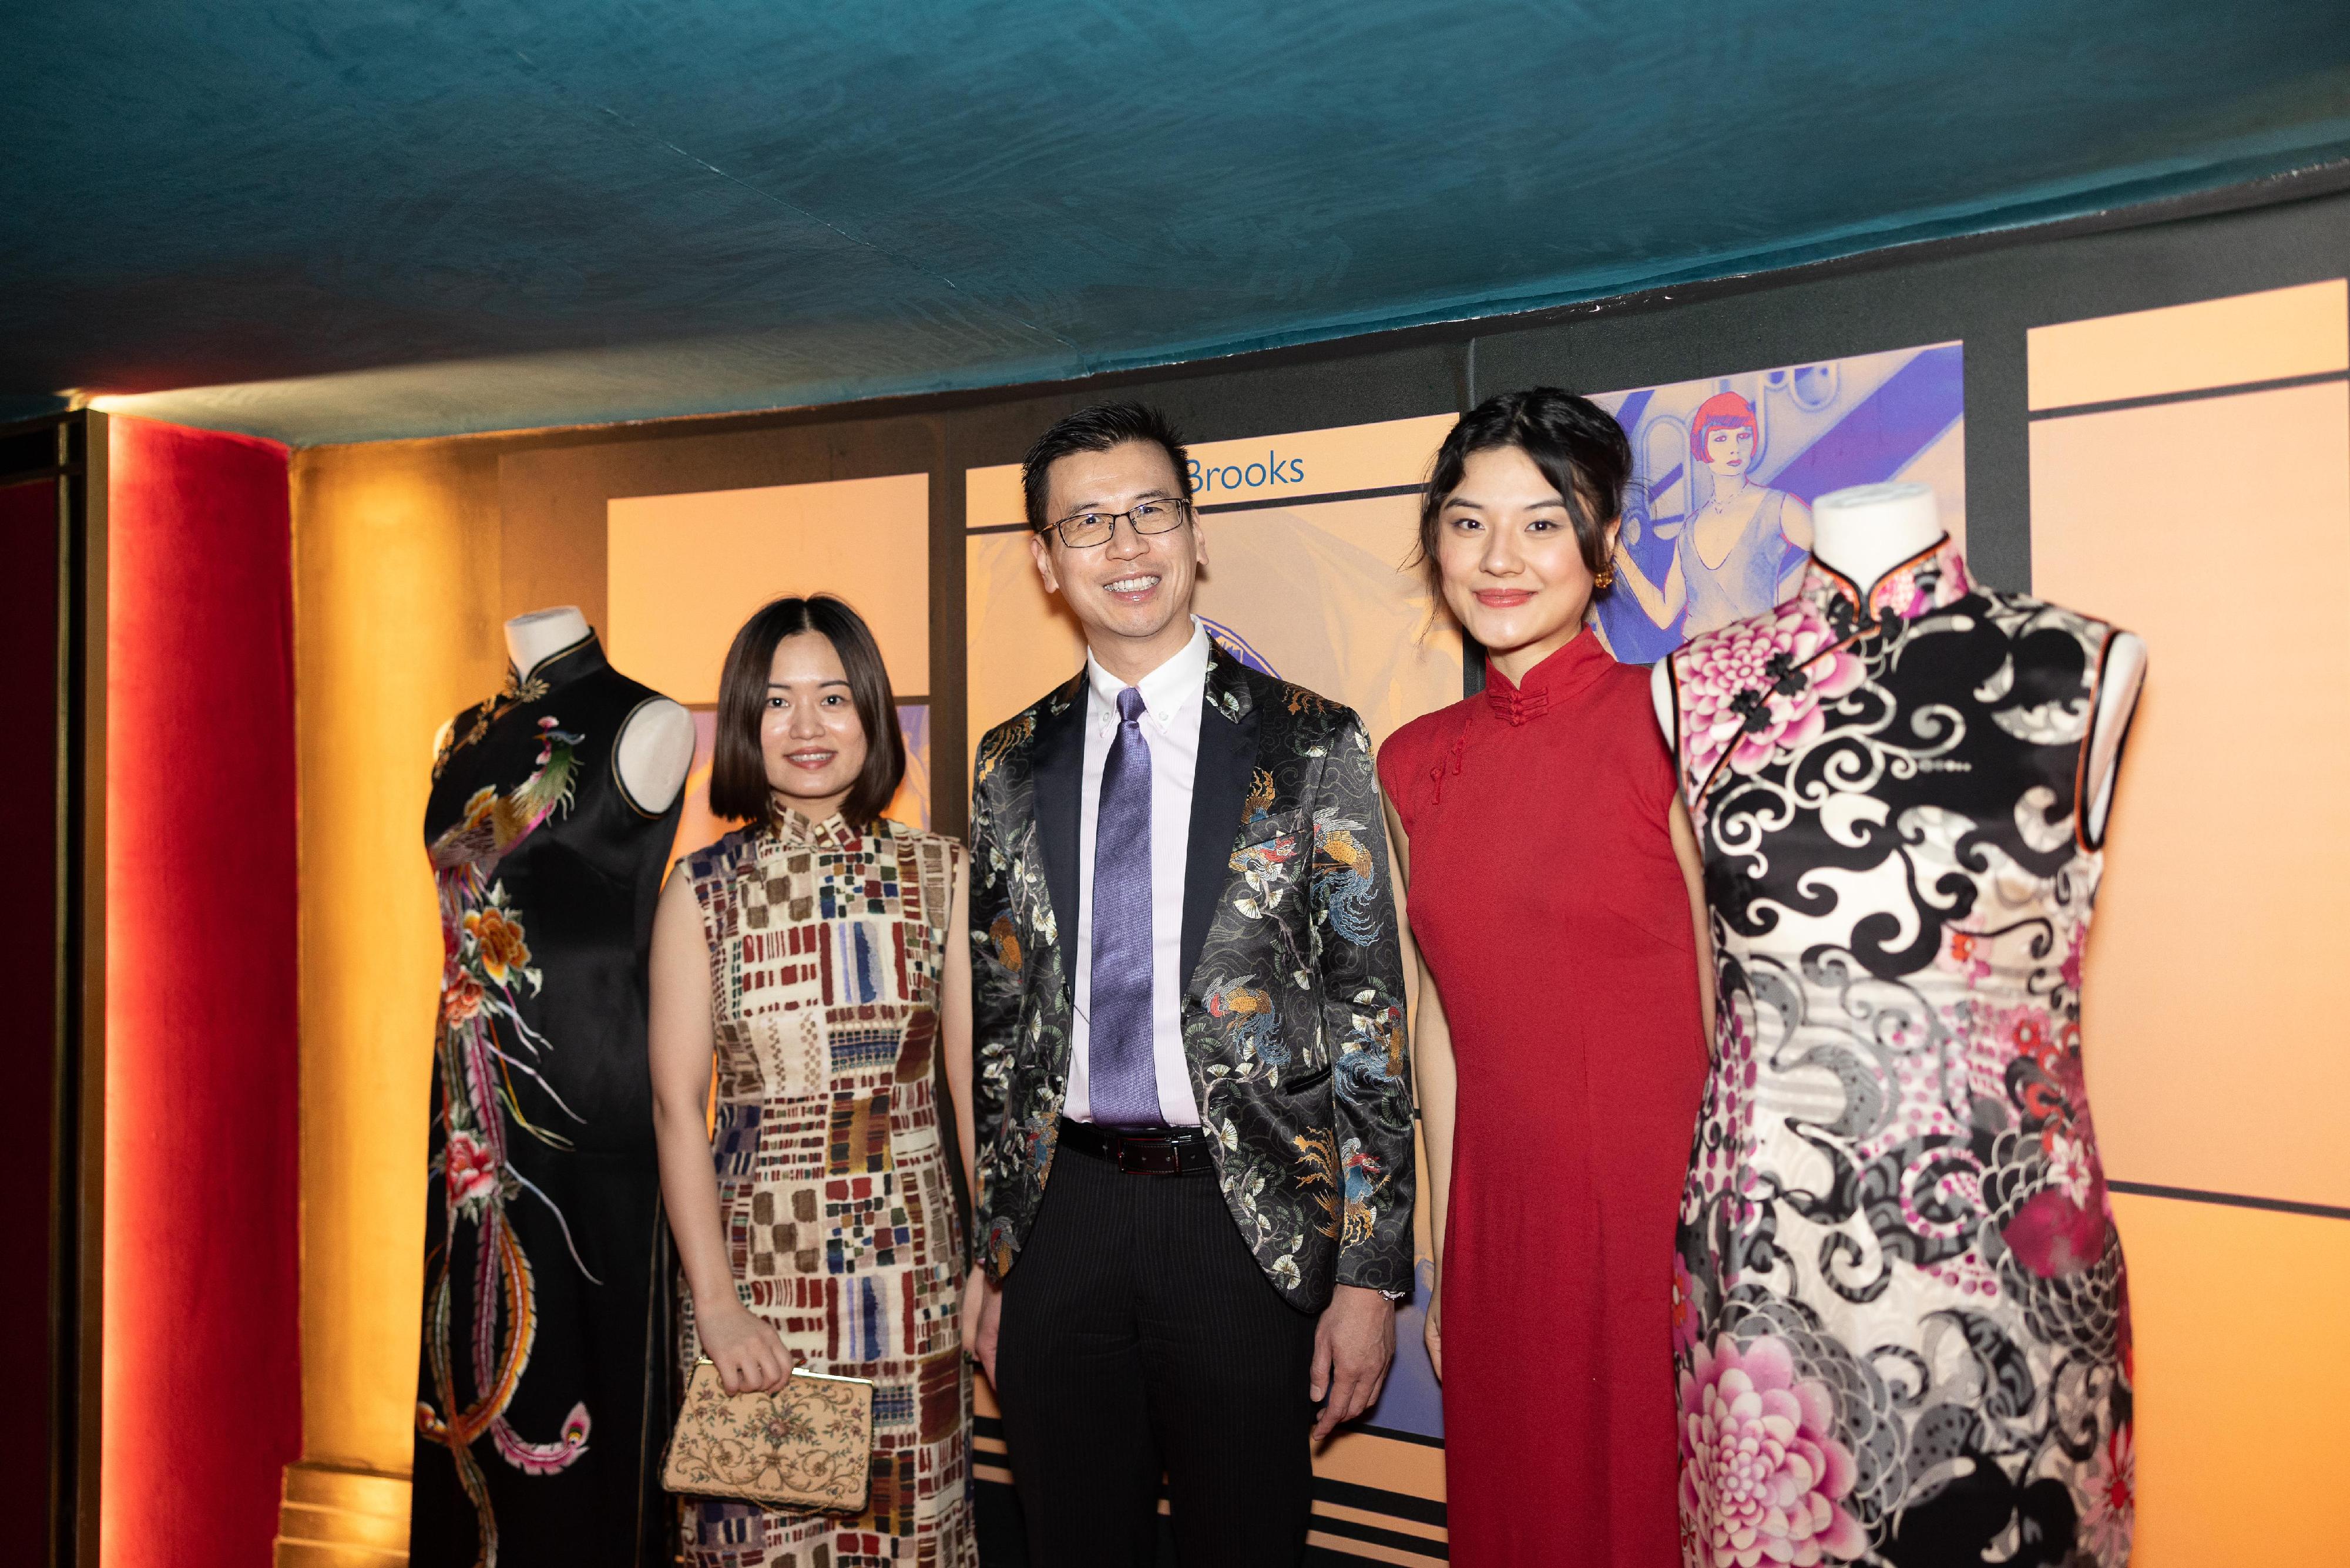 The Hong Kong Economic and Trade Office, London (London ETO) supported the Chinese Cinema Project in staging an immersive screening of "In the Mood for Love" in London, the United Kingdom, on February 3 (London time) to showcase Hong Kong’s unique culture. Photo shows (from left) Founder and Lead Curator of the Chinese Cinema Project, Ms Millie Zhou; the Director-General of London ETO, Mr Gilford Law and Film Curator, Chinese Cinema Project, Ms Yao Tu touring the cheongsam exhibition.